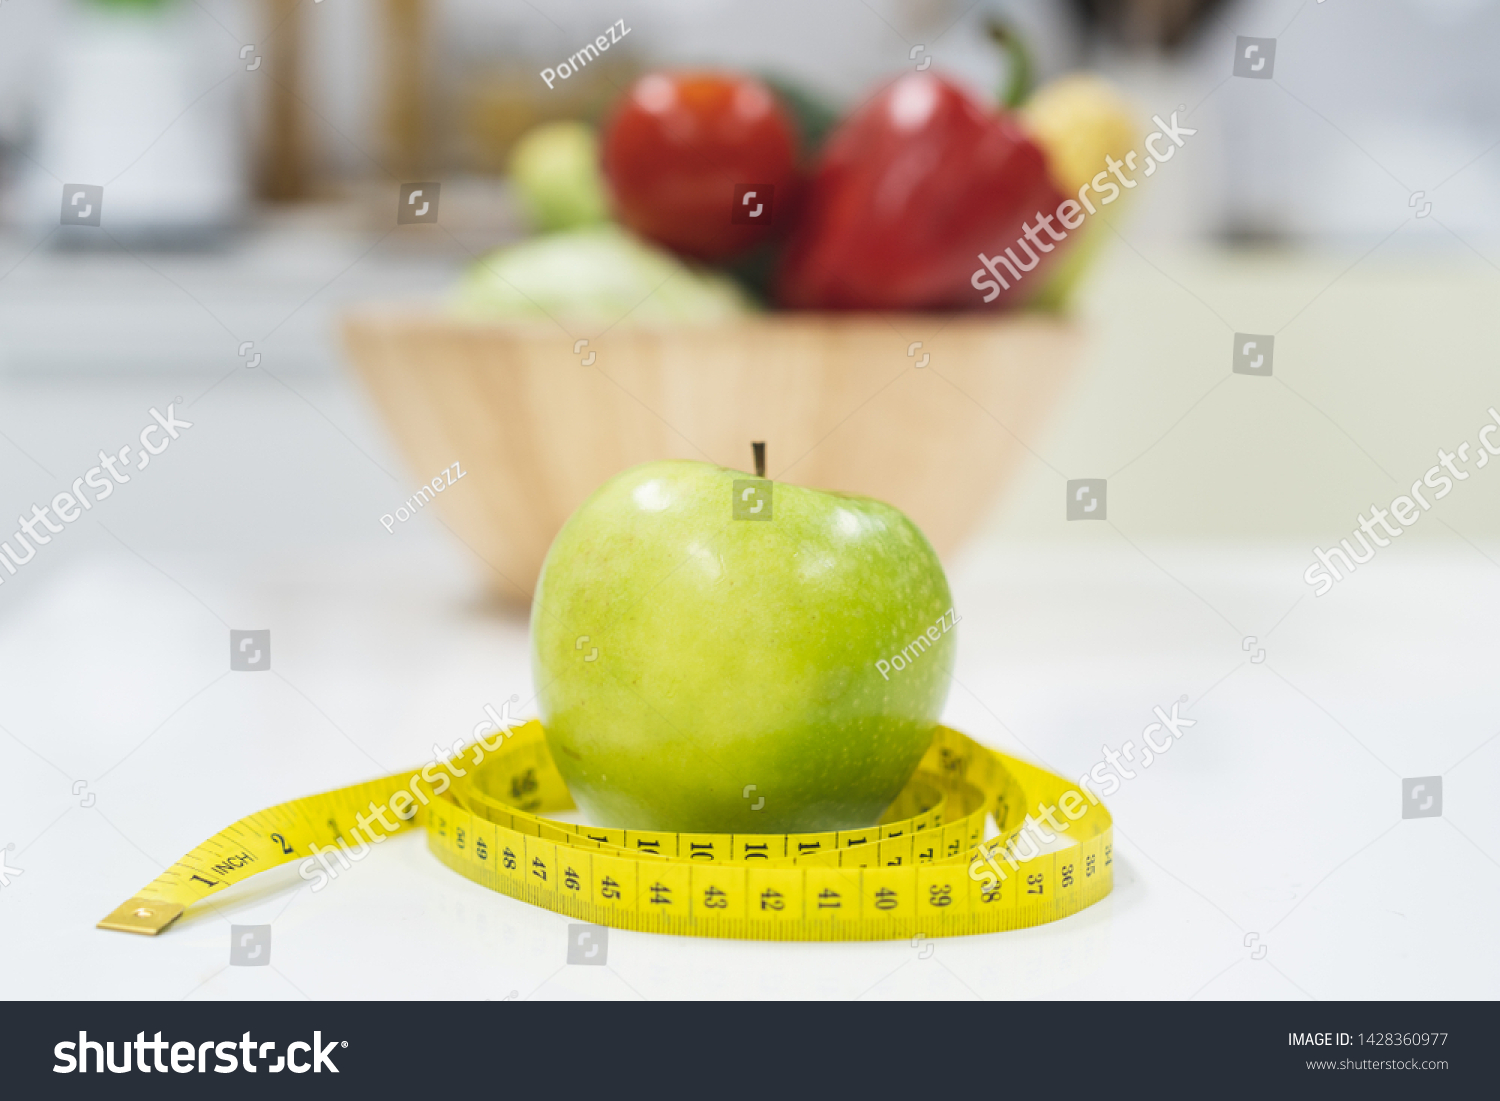 Diet breakfast concept. green apple and measure tape. #1428360977